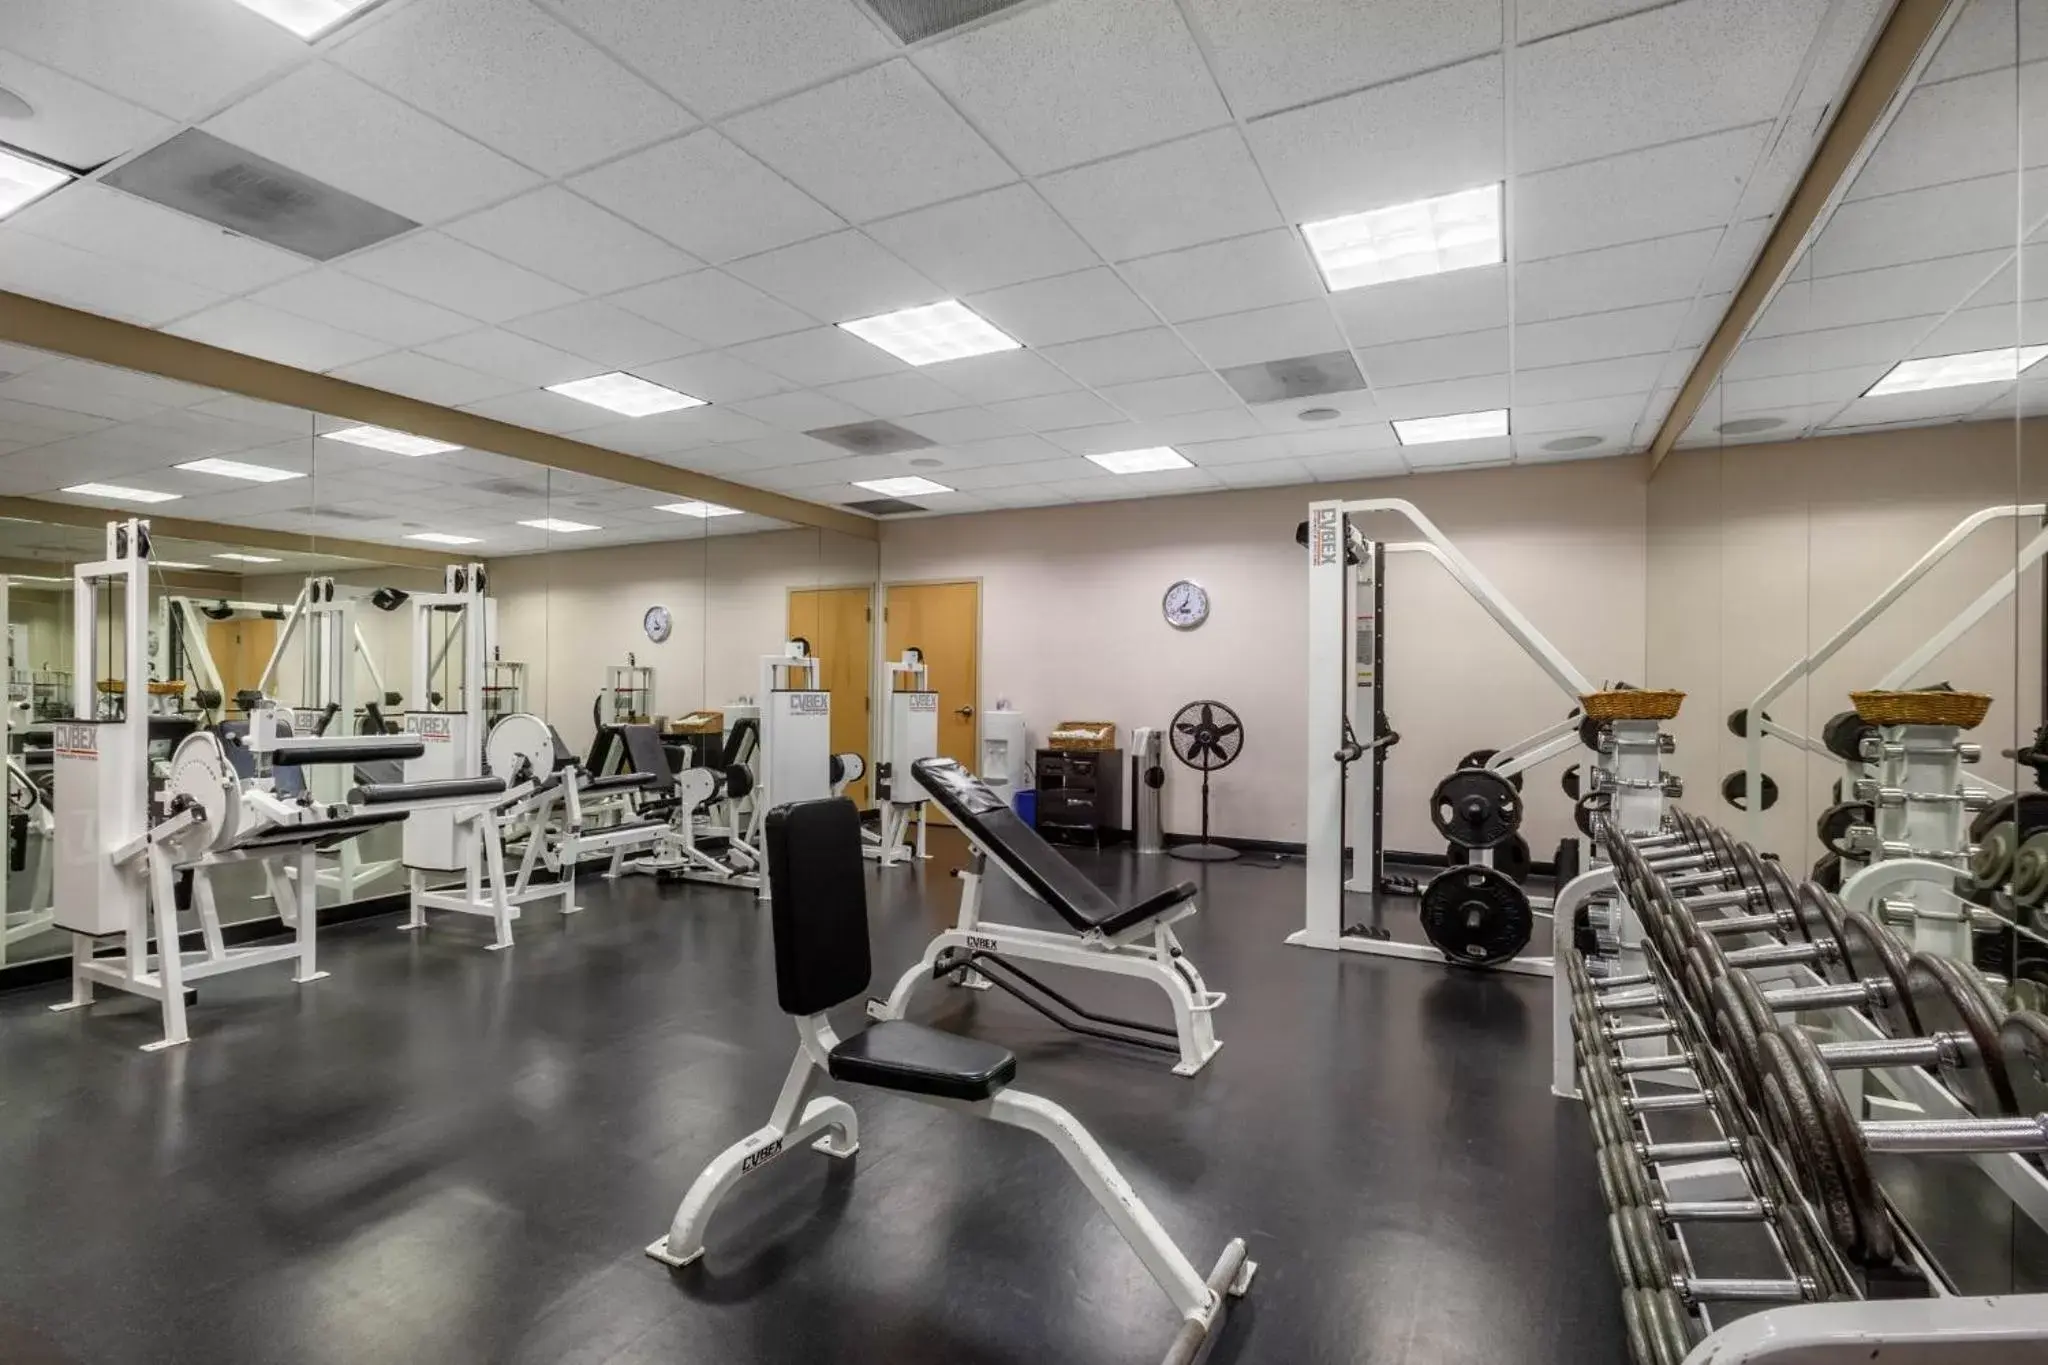 Fitness centre/facilities, Fitness Center/Facilities in Omni Tucson National Resort